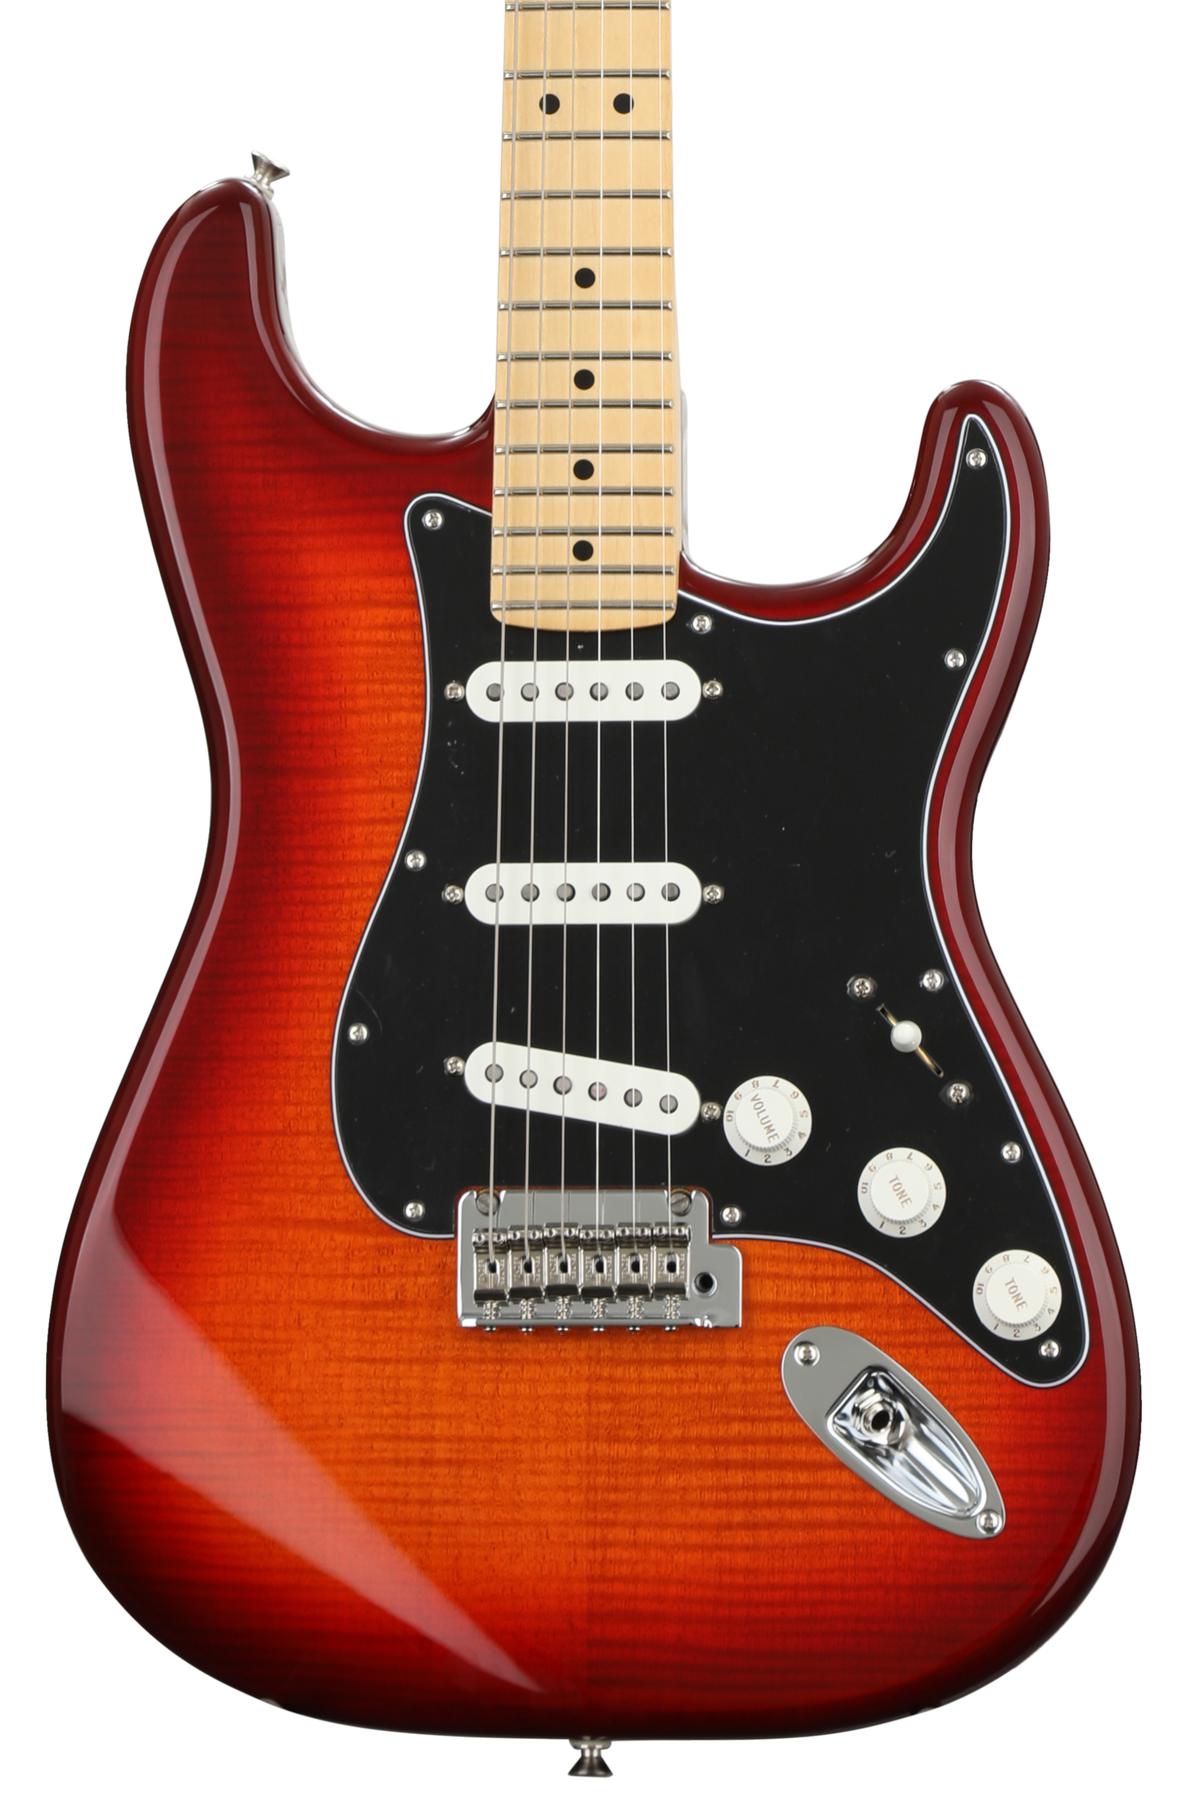 Fender Stratocaster vs Telecaster - Key Differences and Which is Better?